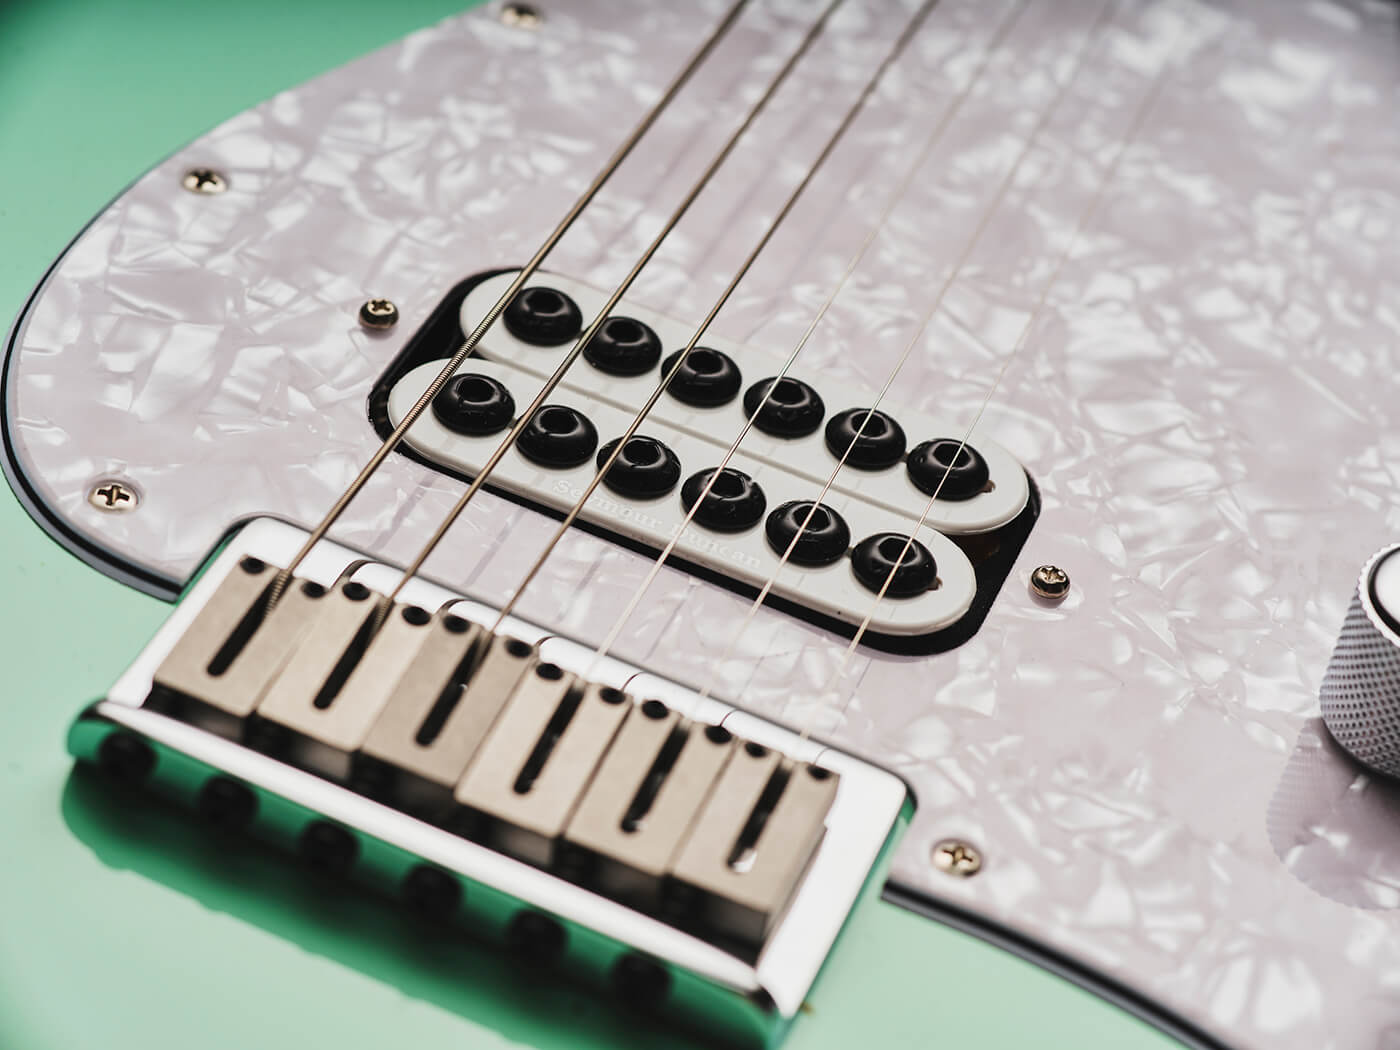 Seymour Duncan Invader humbucker and hard-tail Stratocaster bridge with block saddles by Adam Gasson